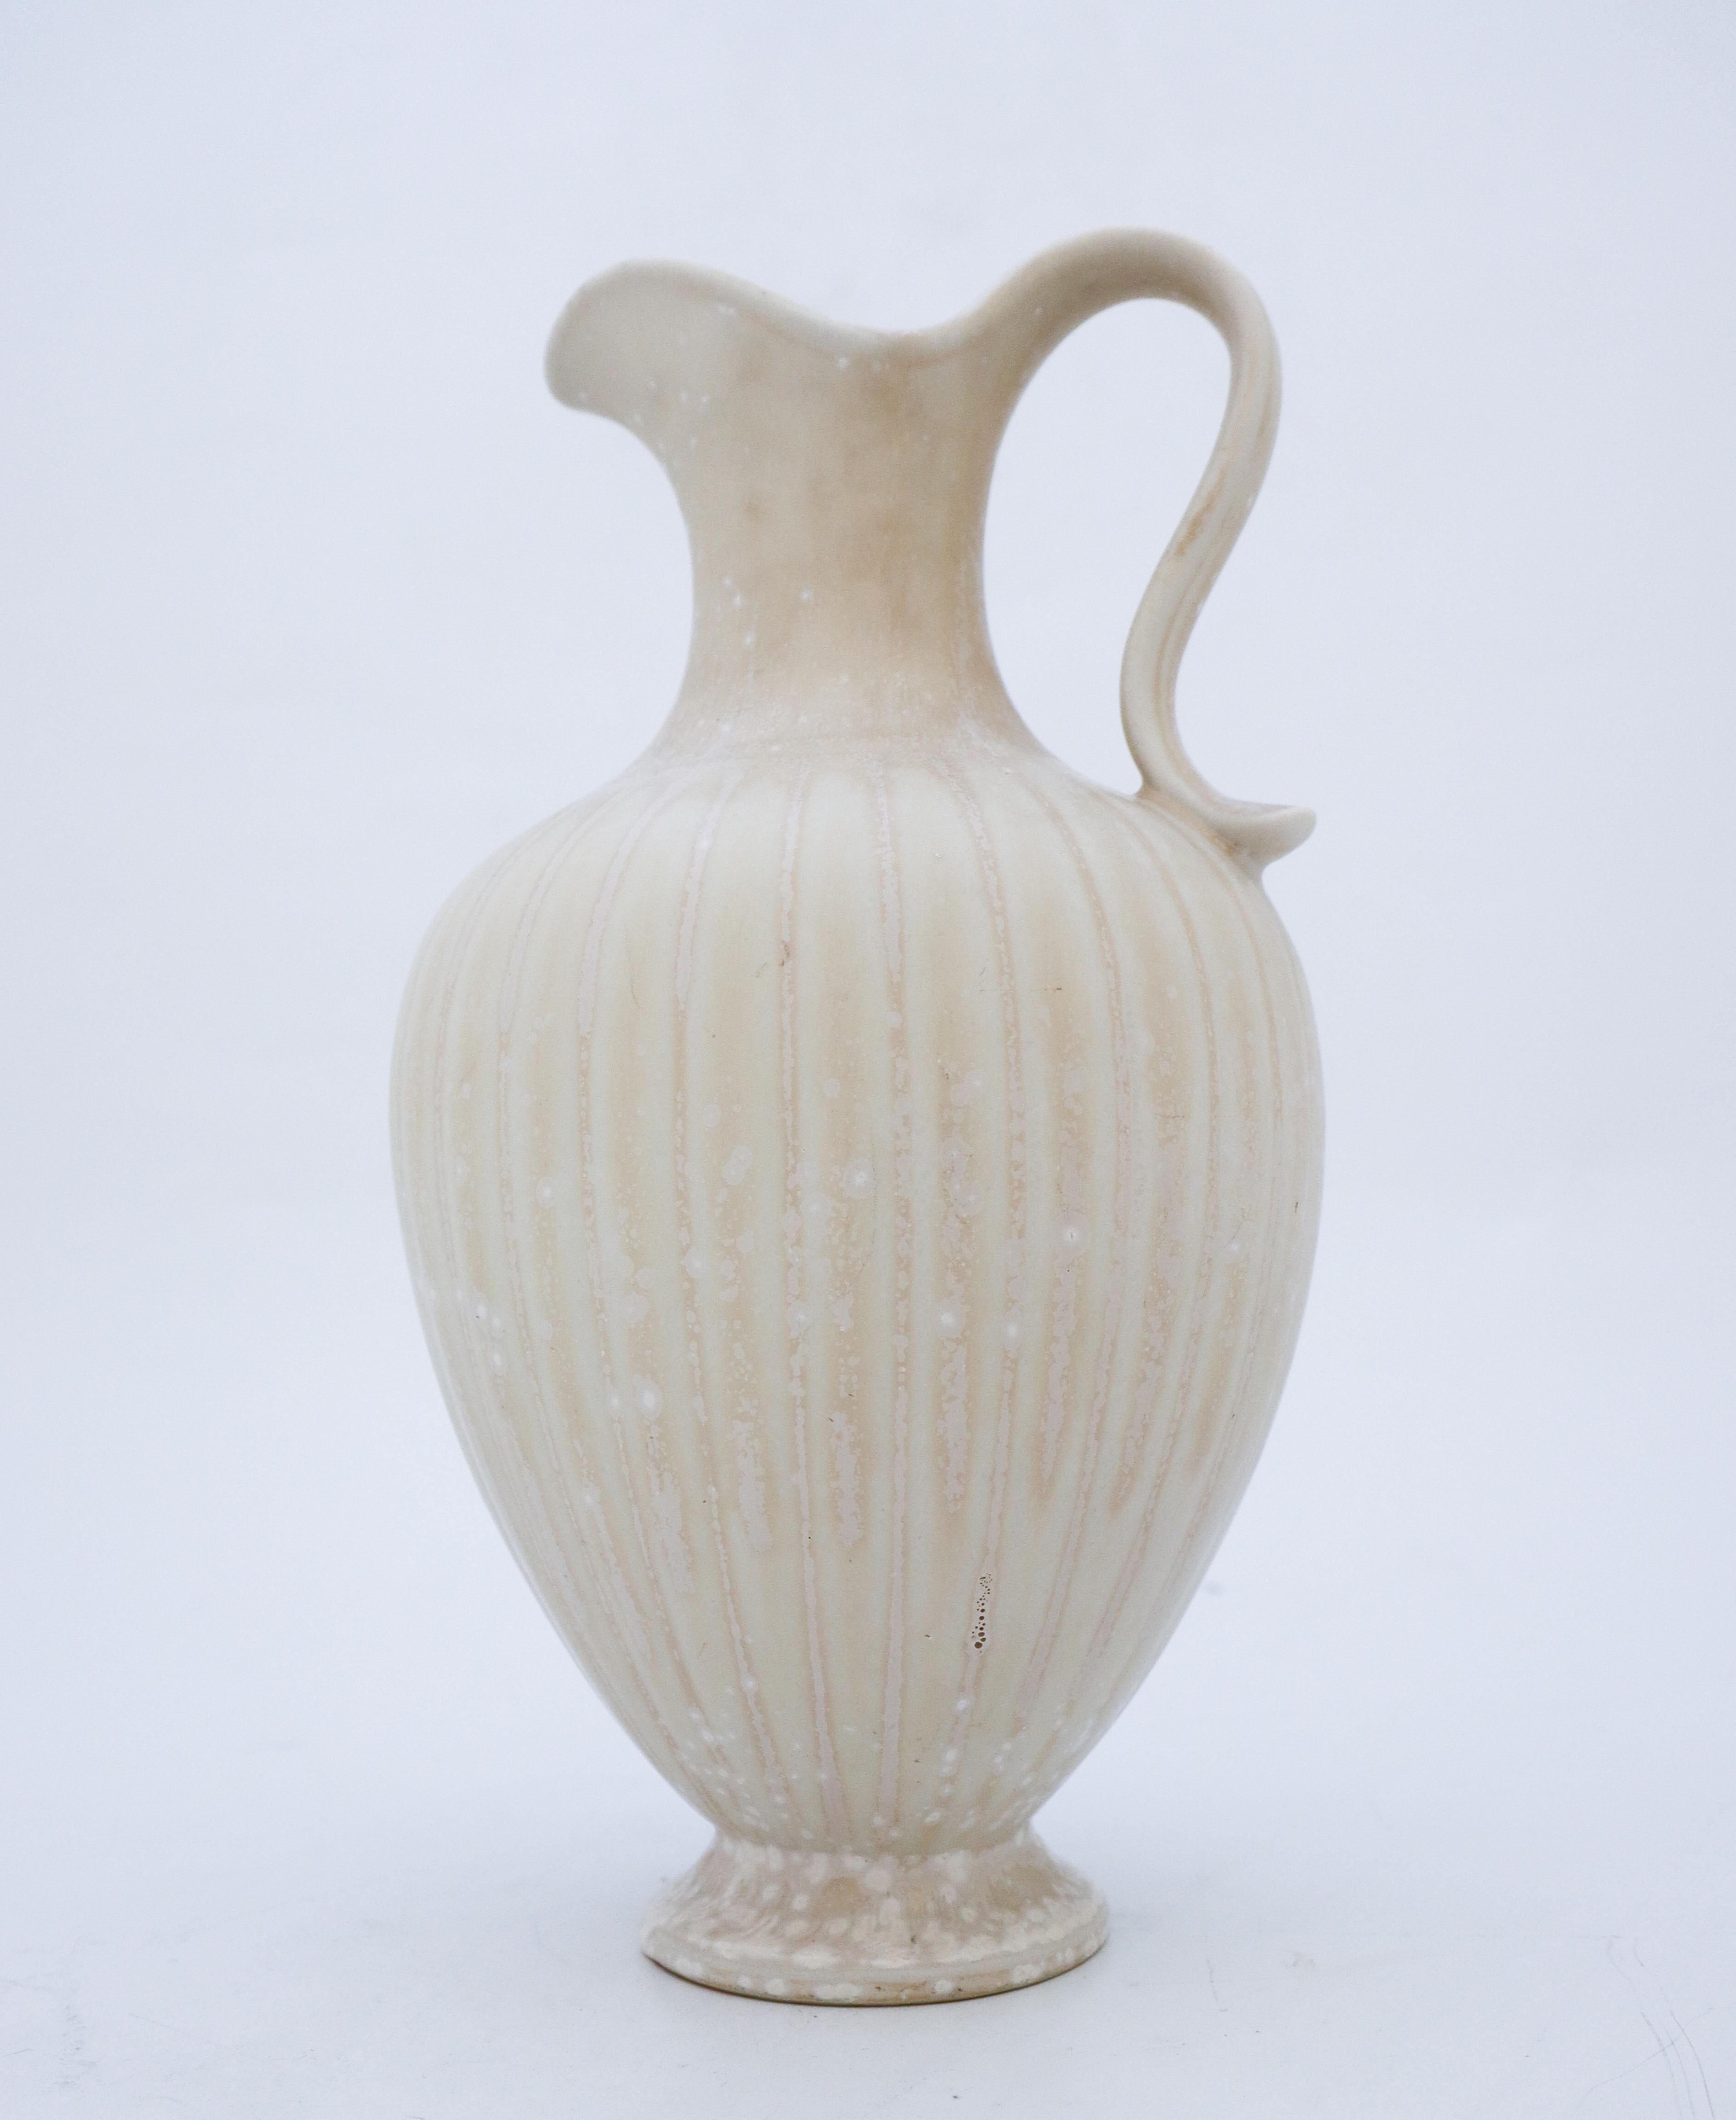 A white speckled vase designed by Gunnar Nylund at Rörstrand, the vase is 28.5 cm high and it is in very good condition except from some minor scratches. The vase is marked as 1st quality.